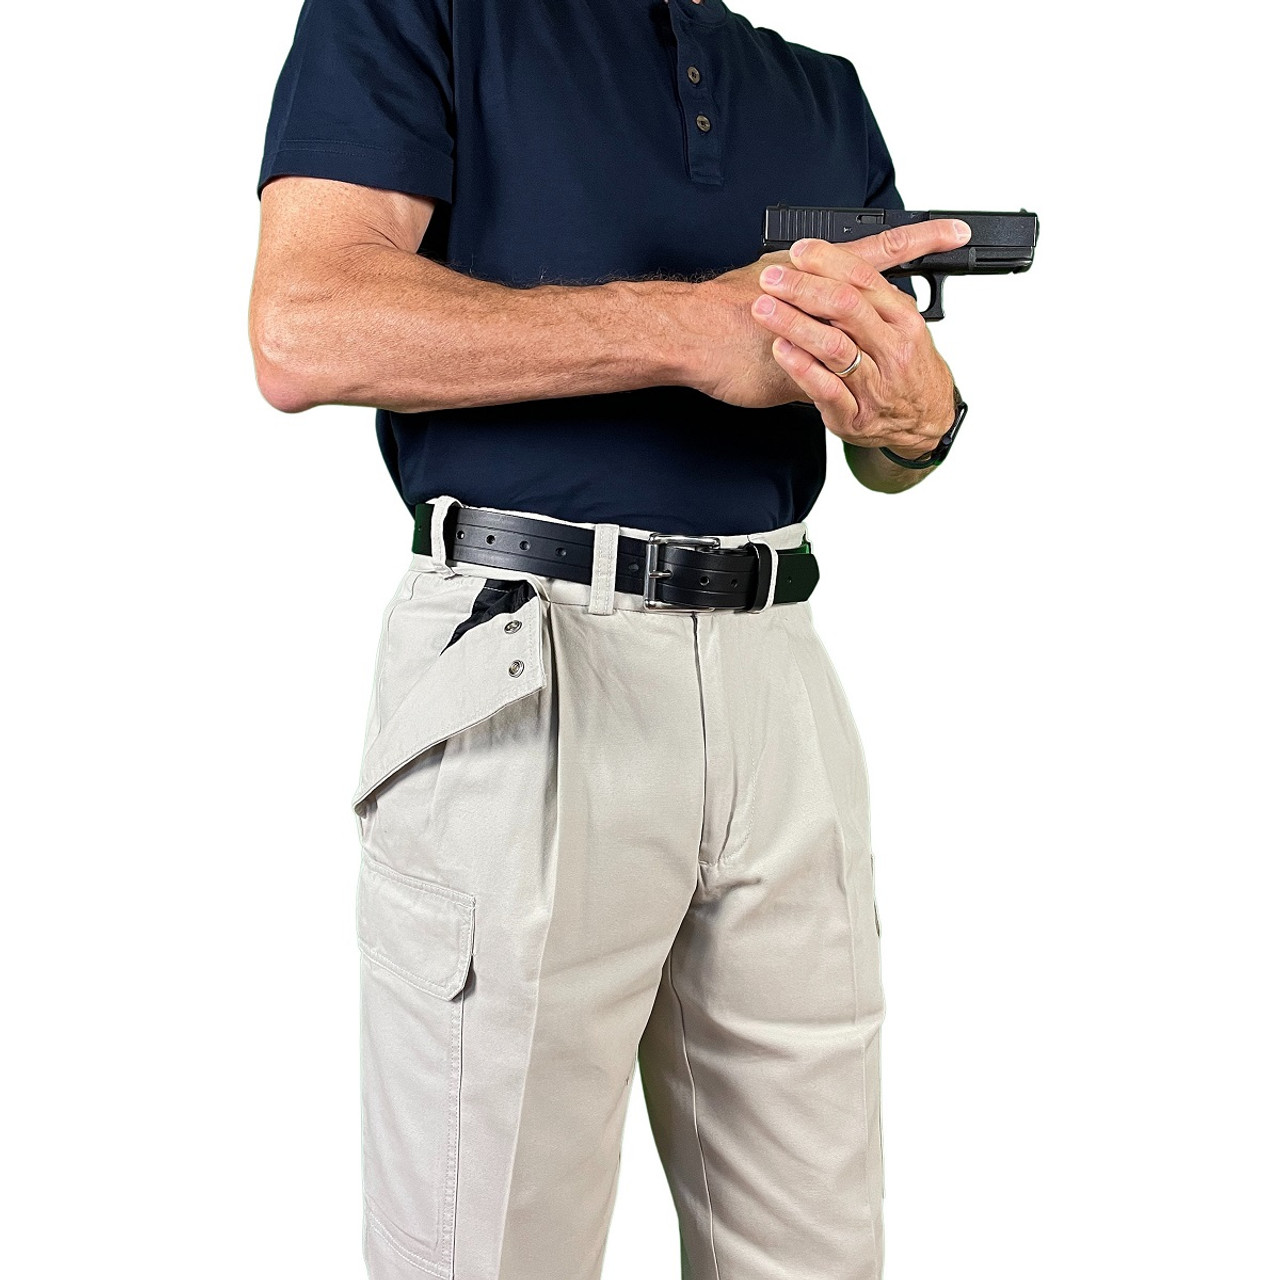 Carry a concealed weapon? 5.11 Tactical has pants for your pistol